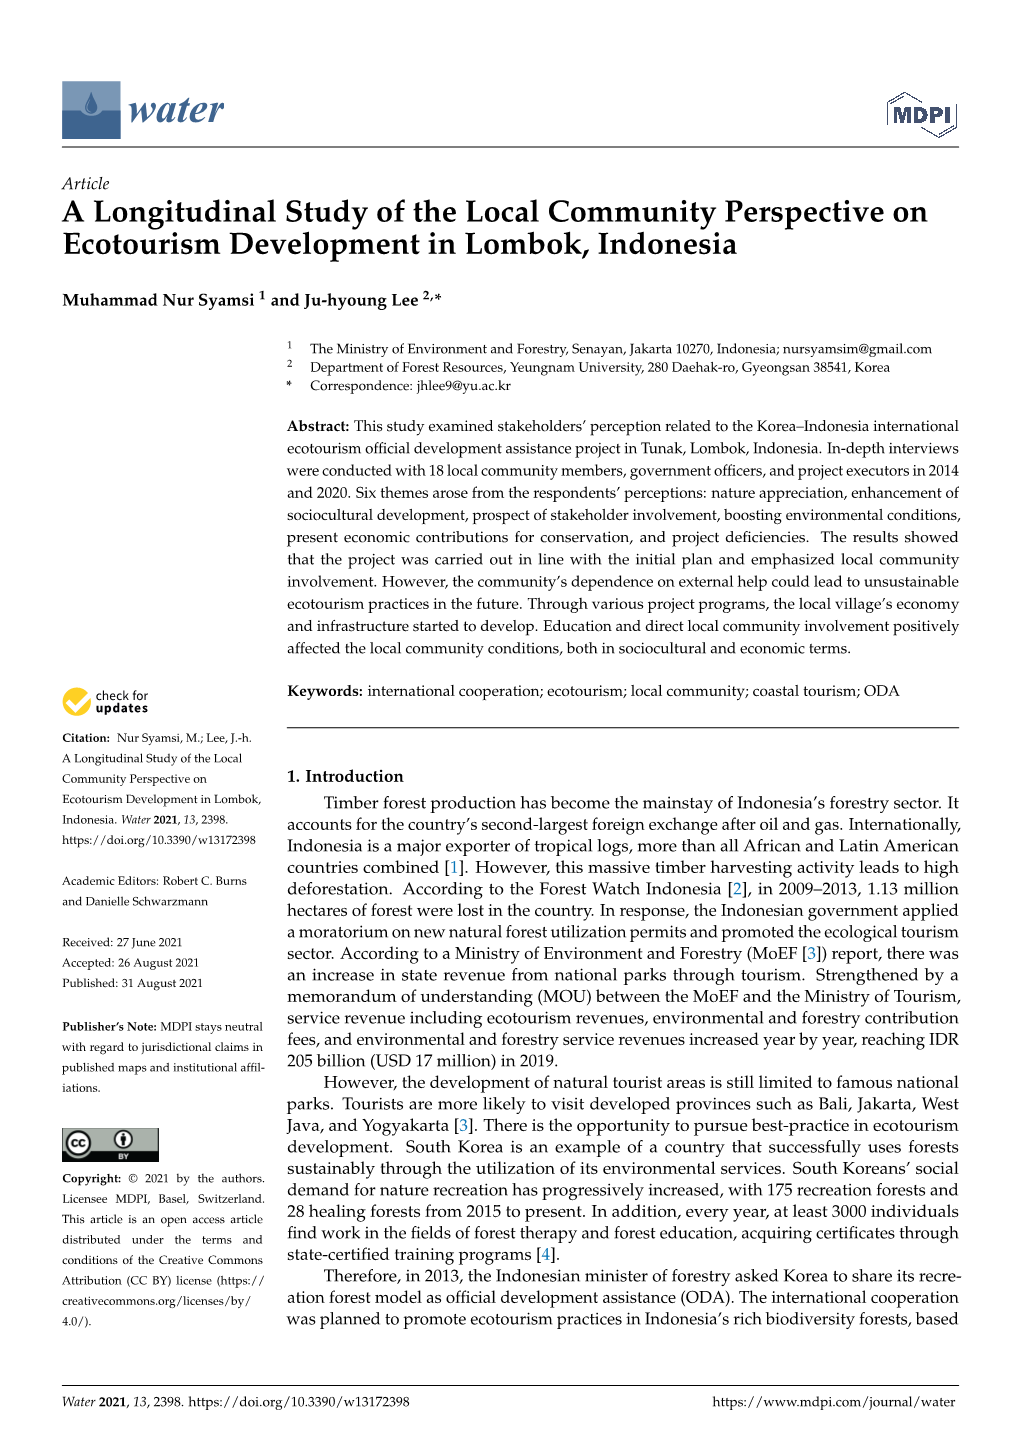 A Longitudinal Study of the Local Community Perspective on Ecotourism Development in Lombok, Indonesia